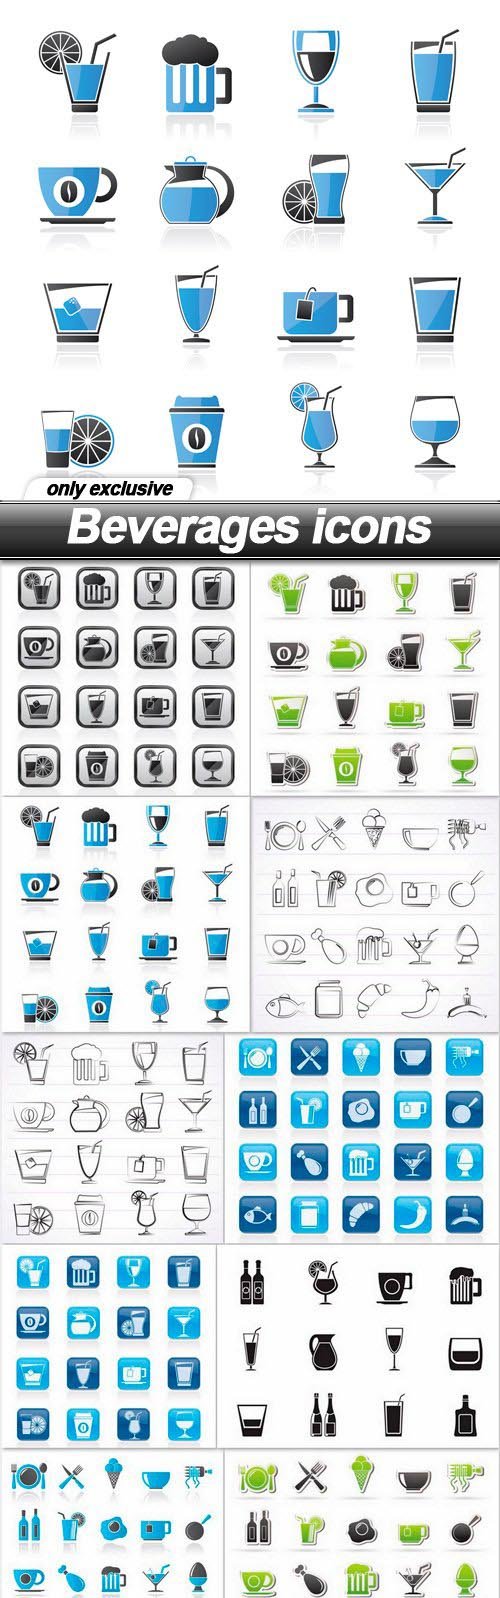 Beverages icons - 10 EPS